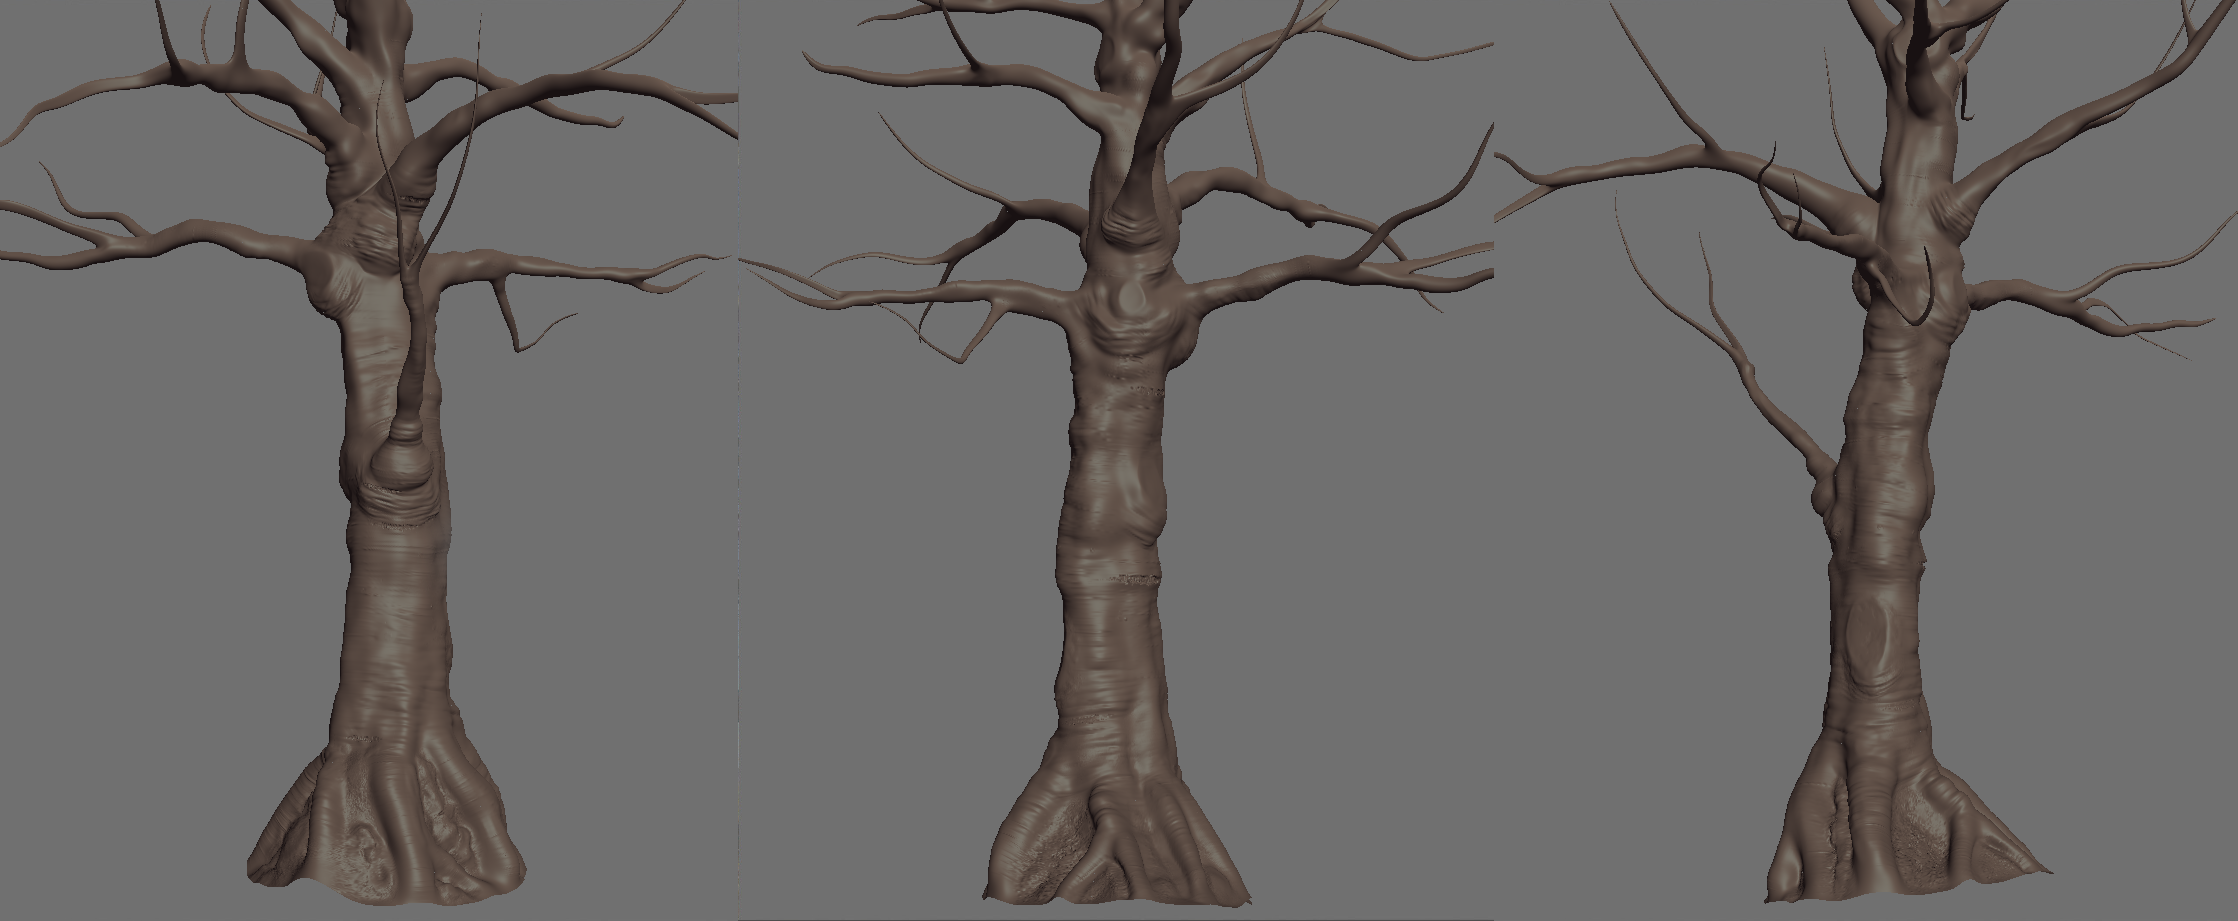 Building a Tree for Games & Animation